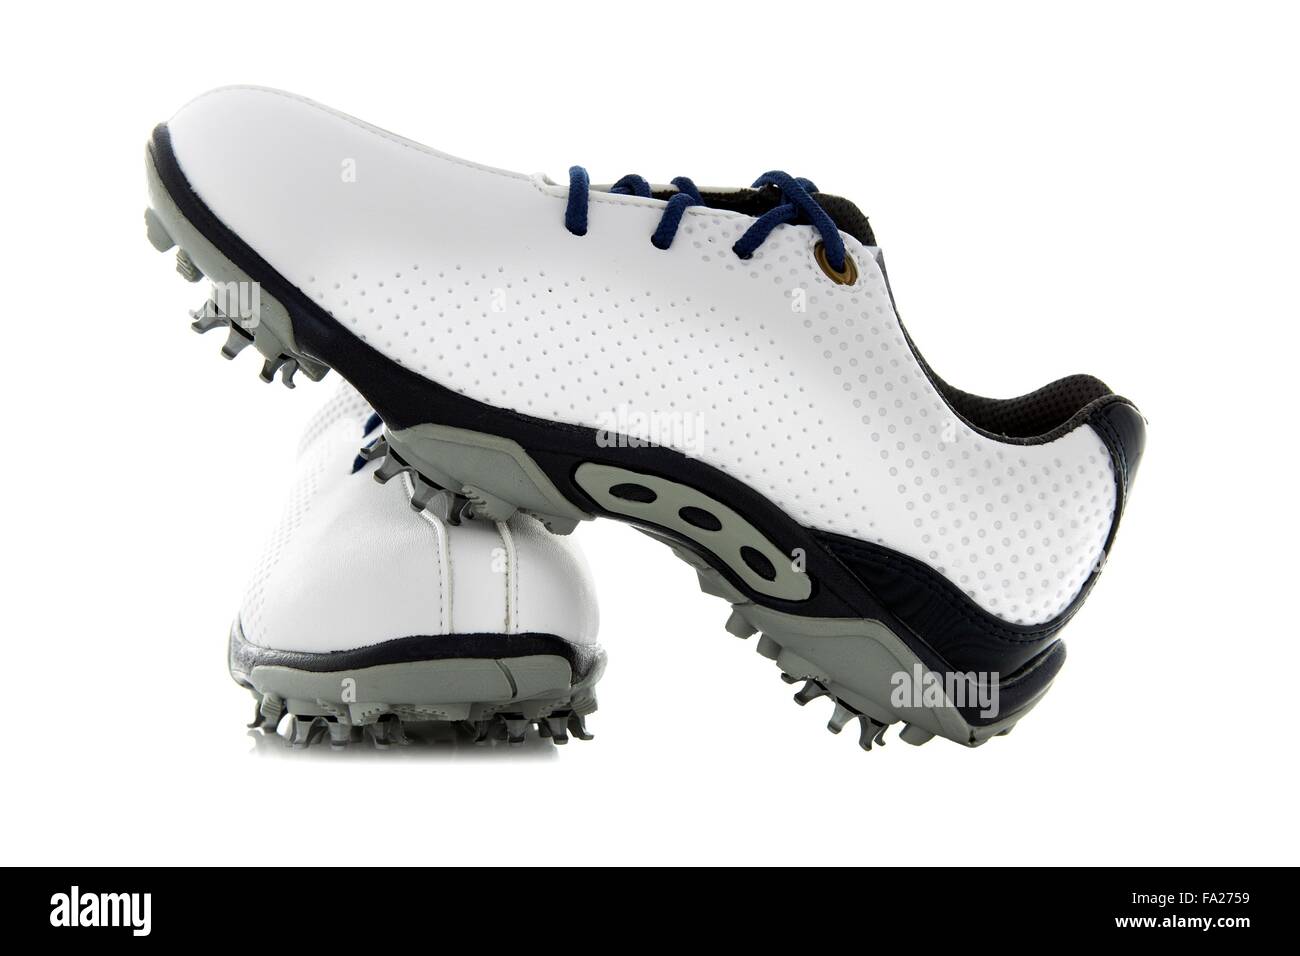 Modern Golf Shoes on a White Background Stock Photo